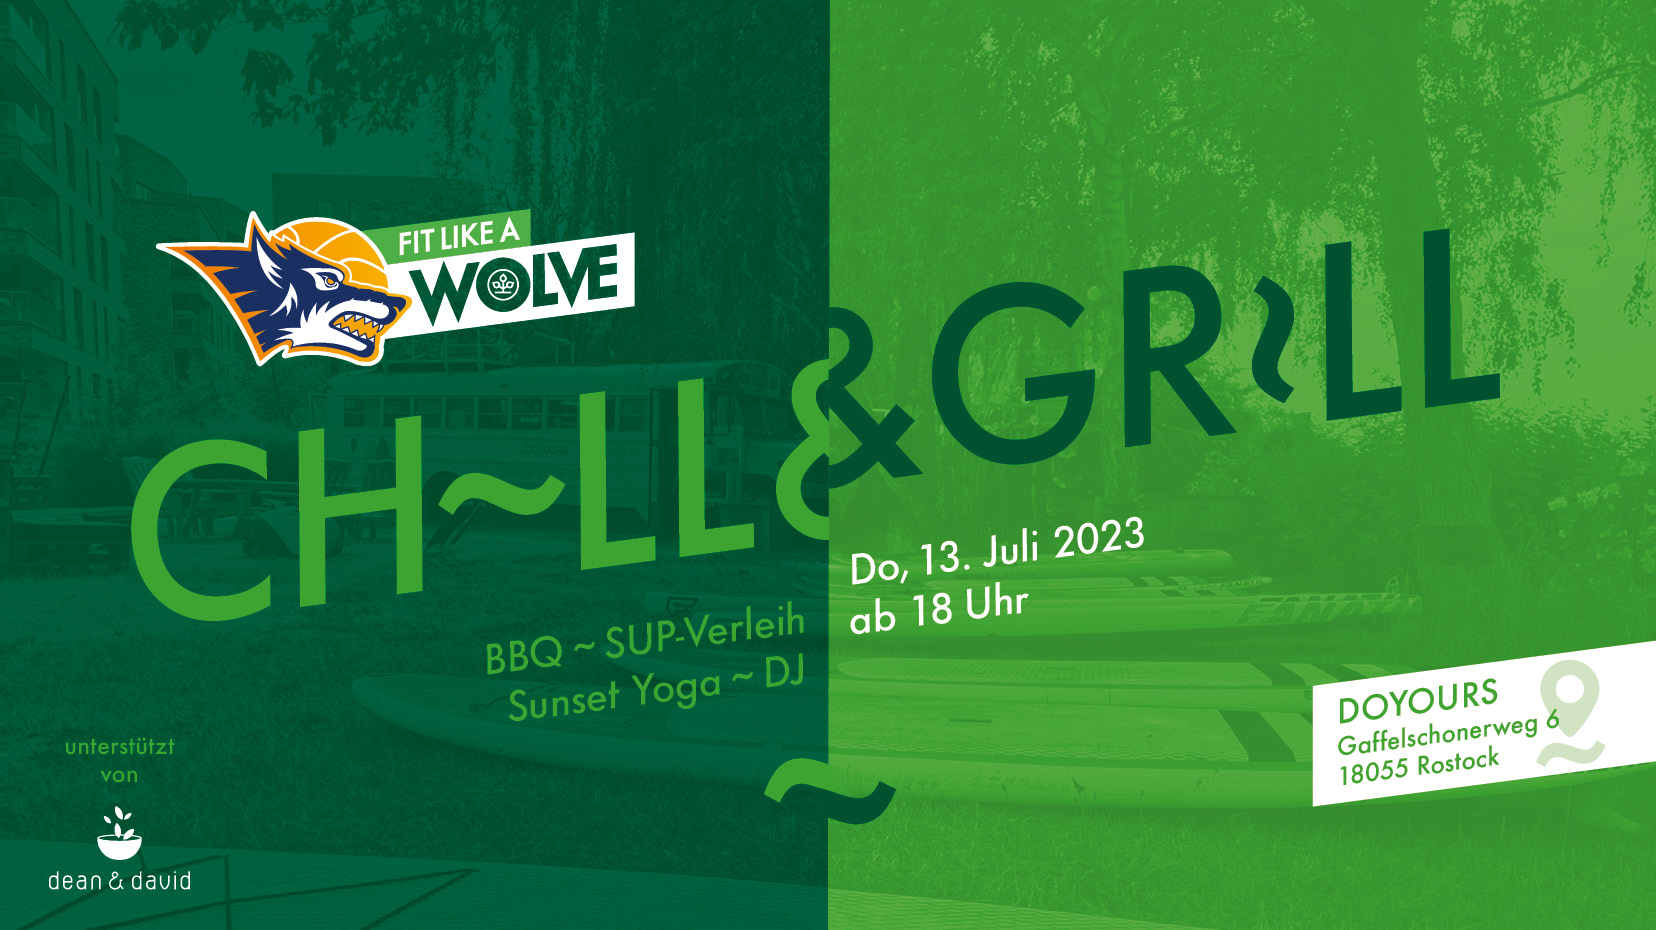 FIT LIKE A WOLVE Event: Chill&Grill am 13. Juli